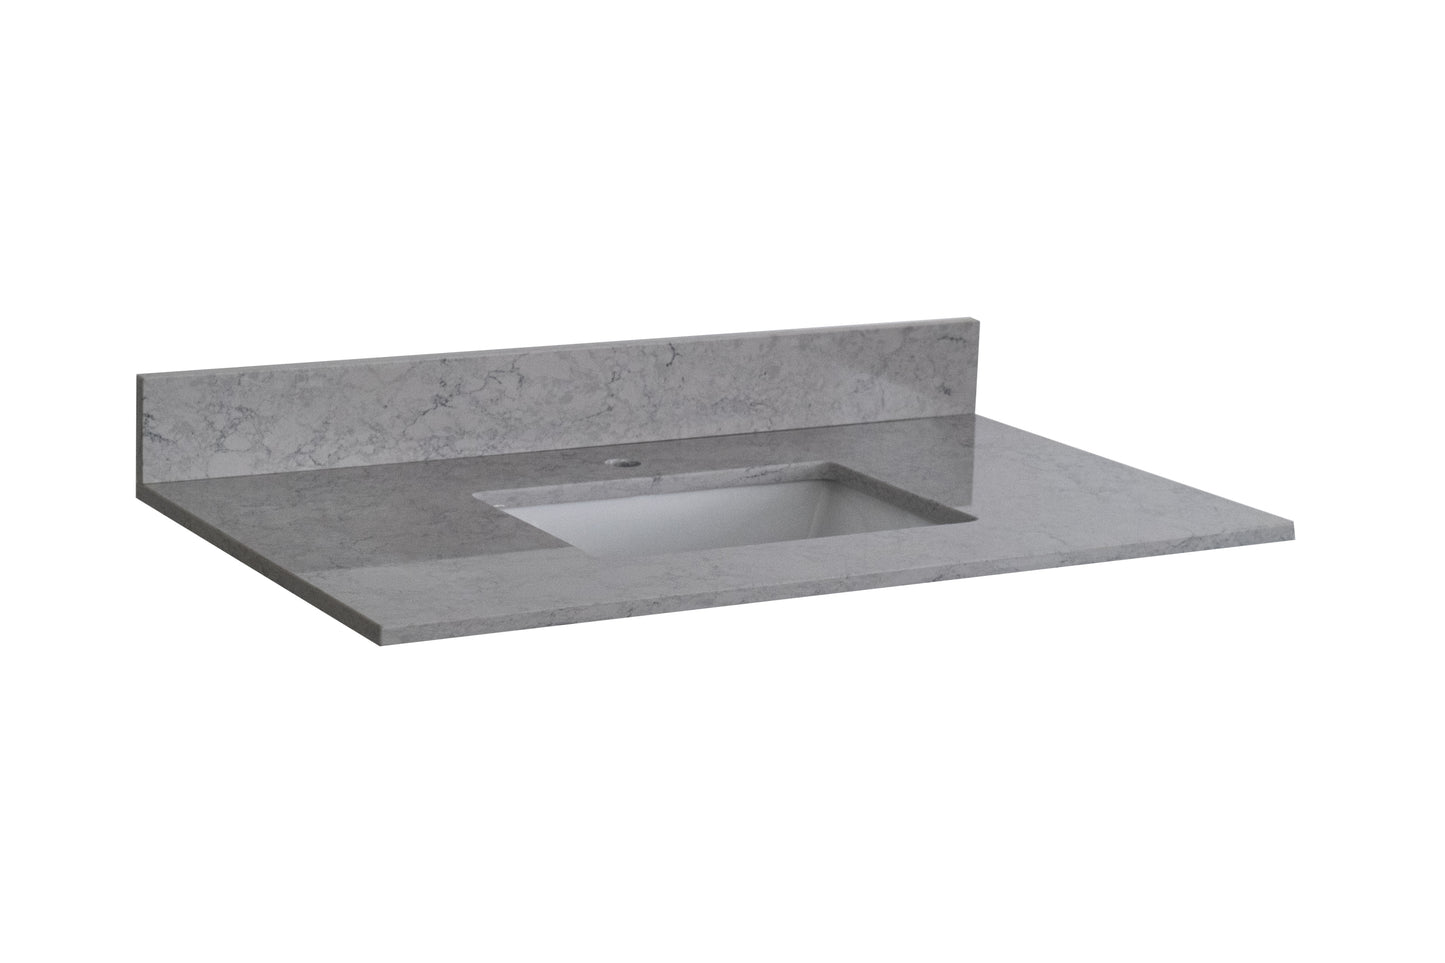 Montary 31 inches bathroom stone vanity top calacatta gray engineered marble color with undermount ceramic sink and single faucet hole with backsplash